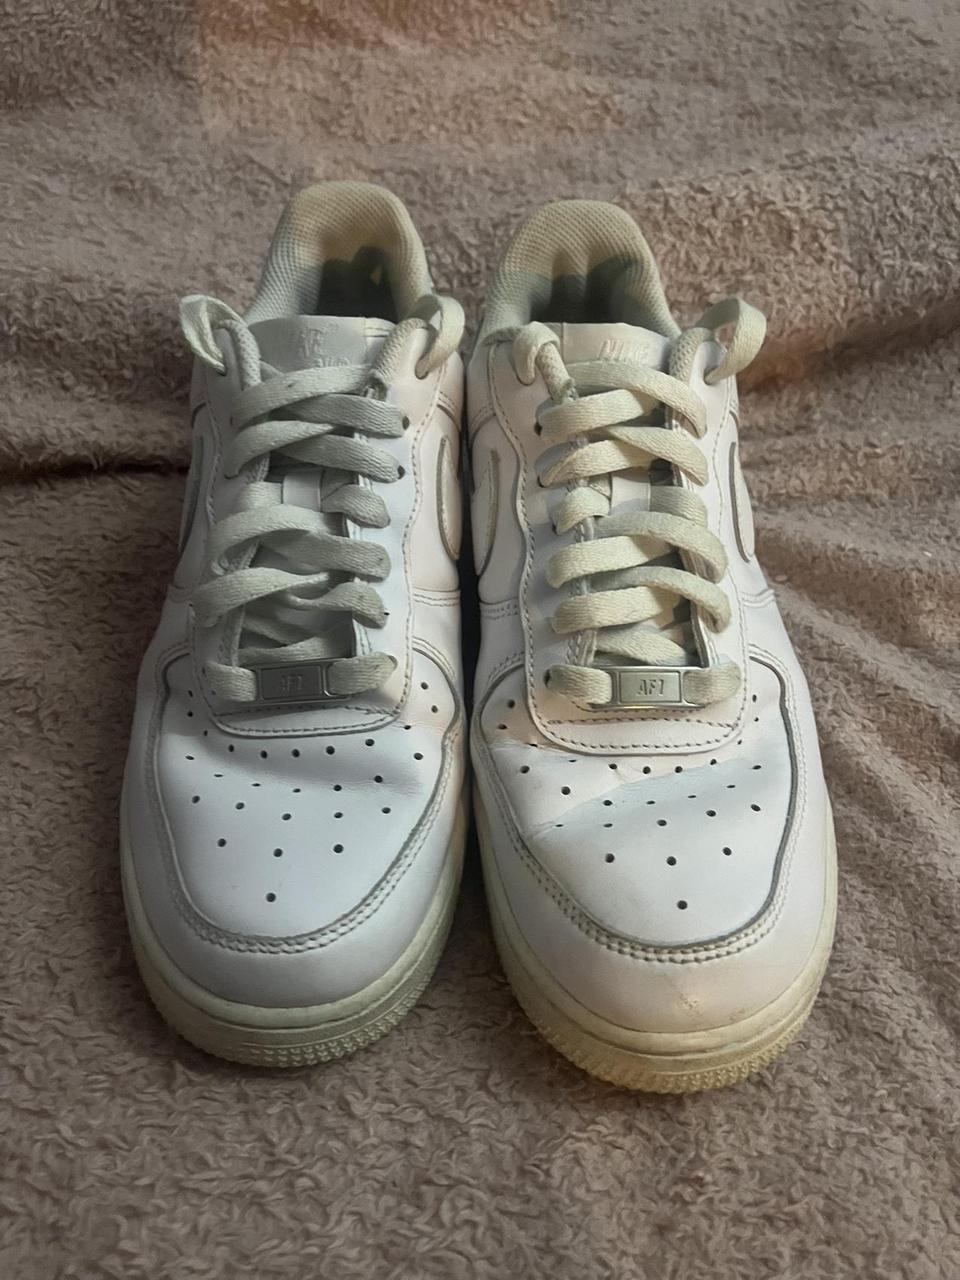 Nike Air Force one in white Good condition Sold as... - Depop